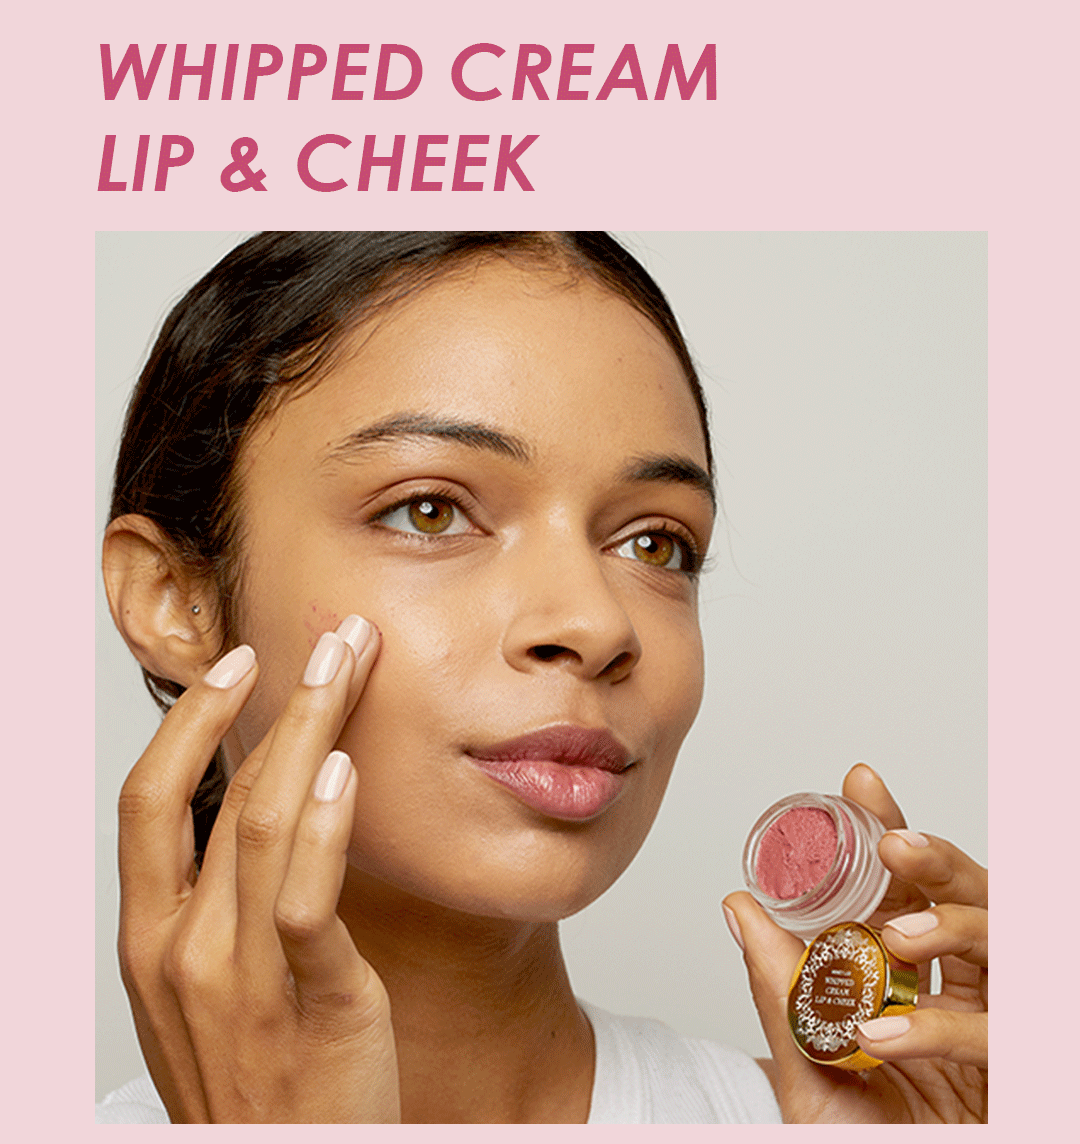 Whipped Cream LIp & Cheek Is BACK IN STOCK!